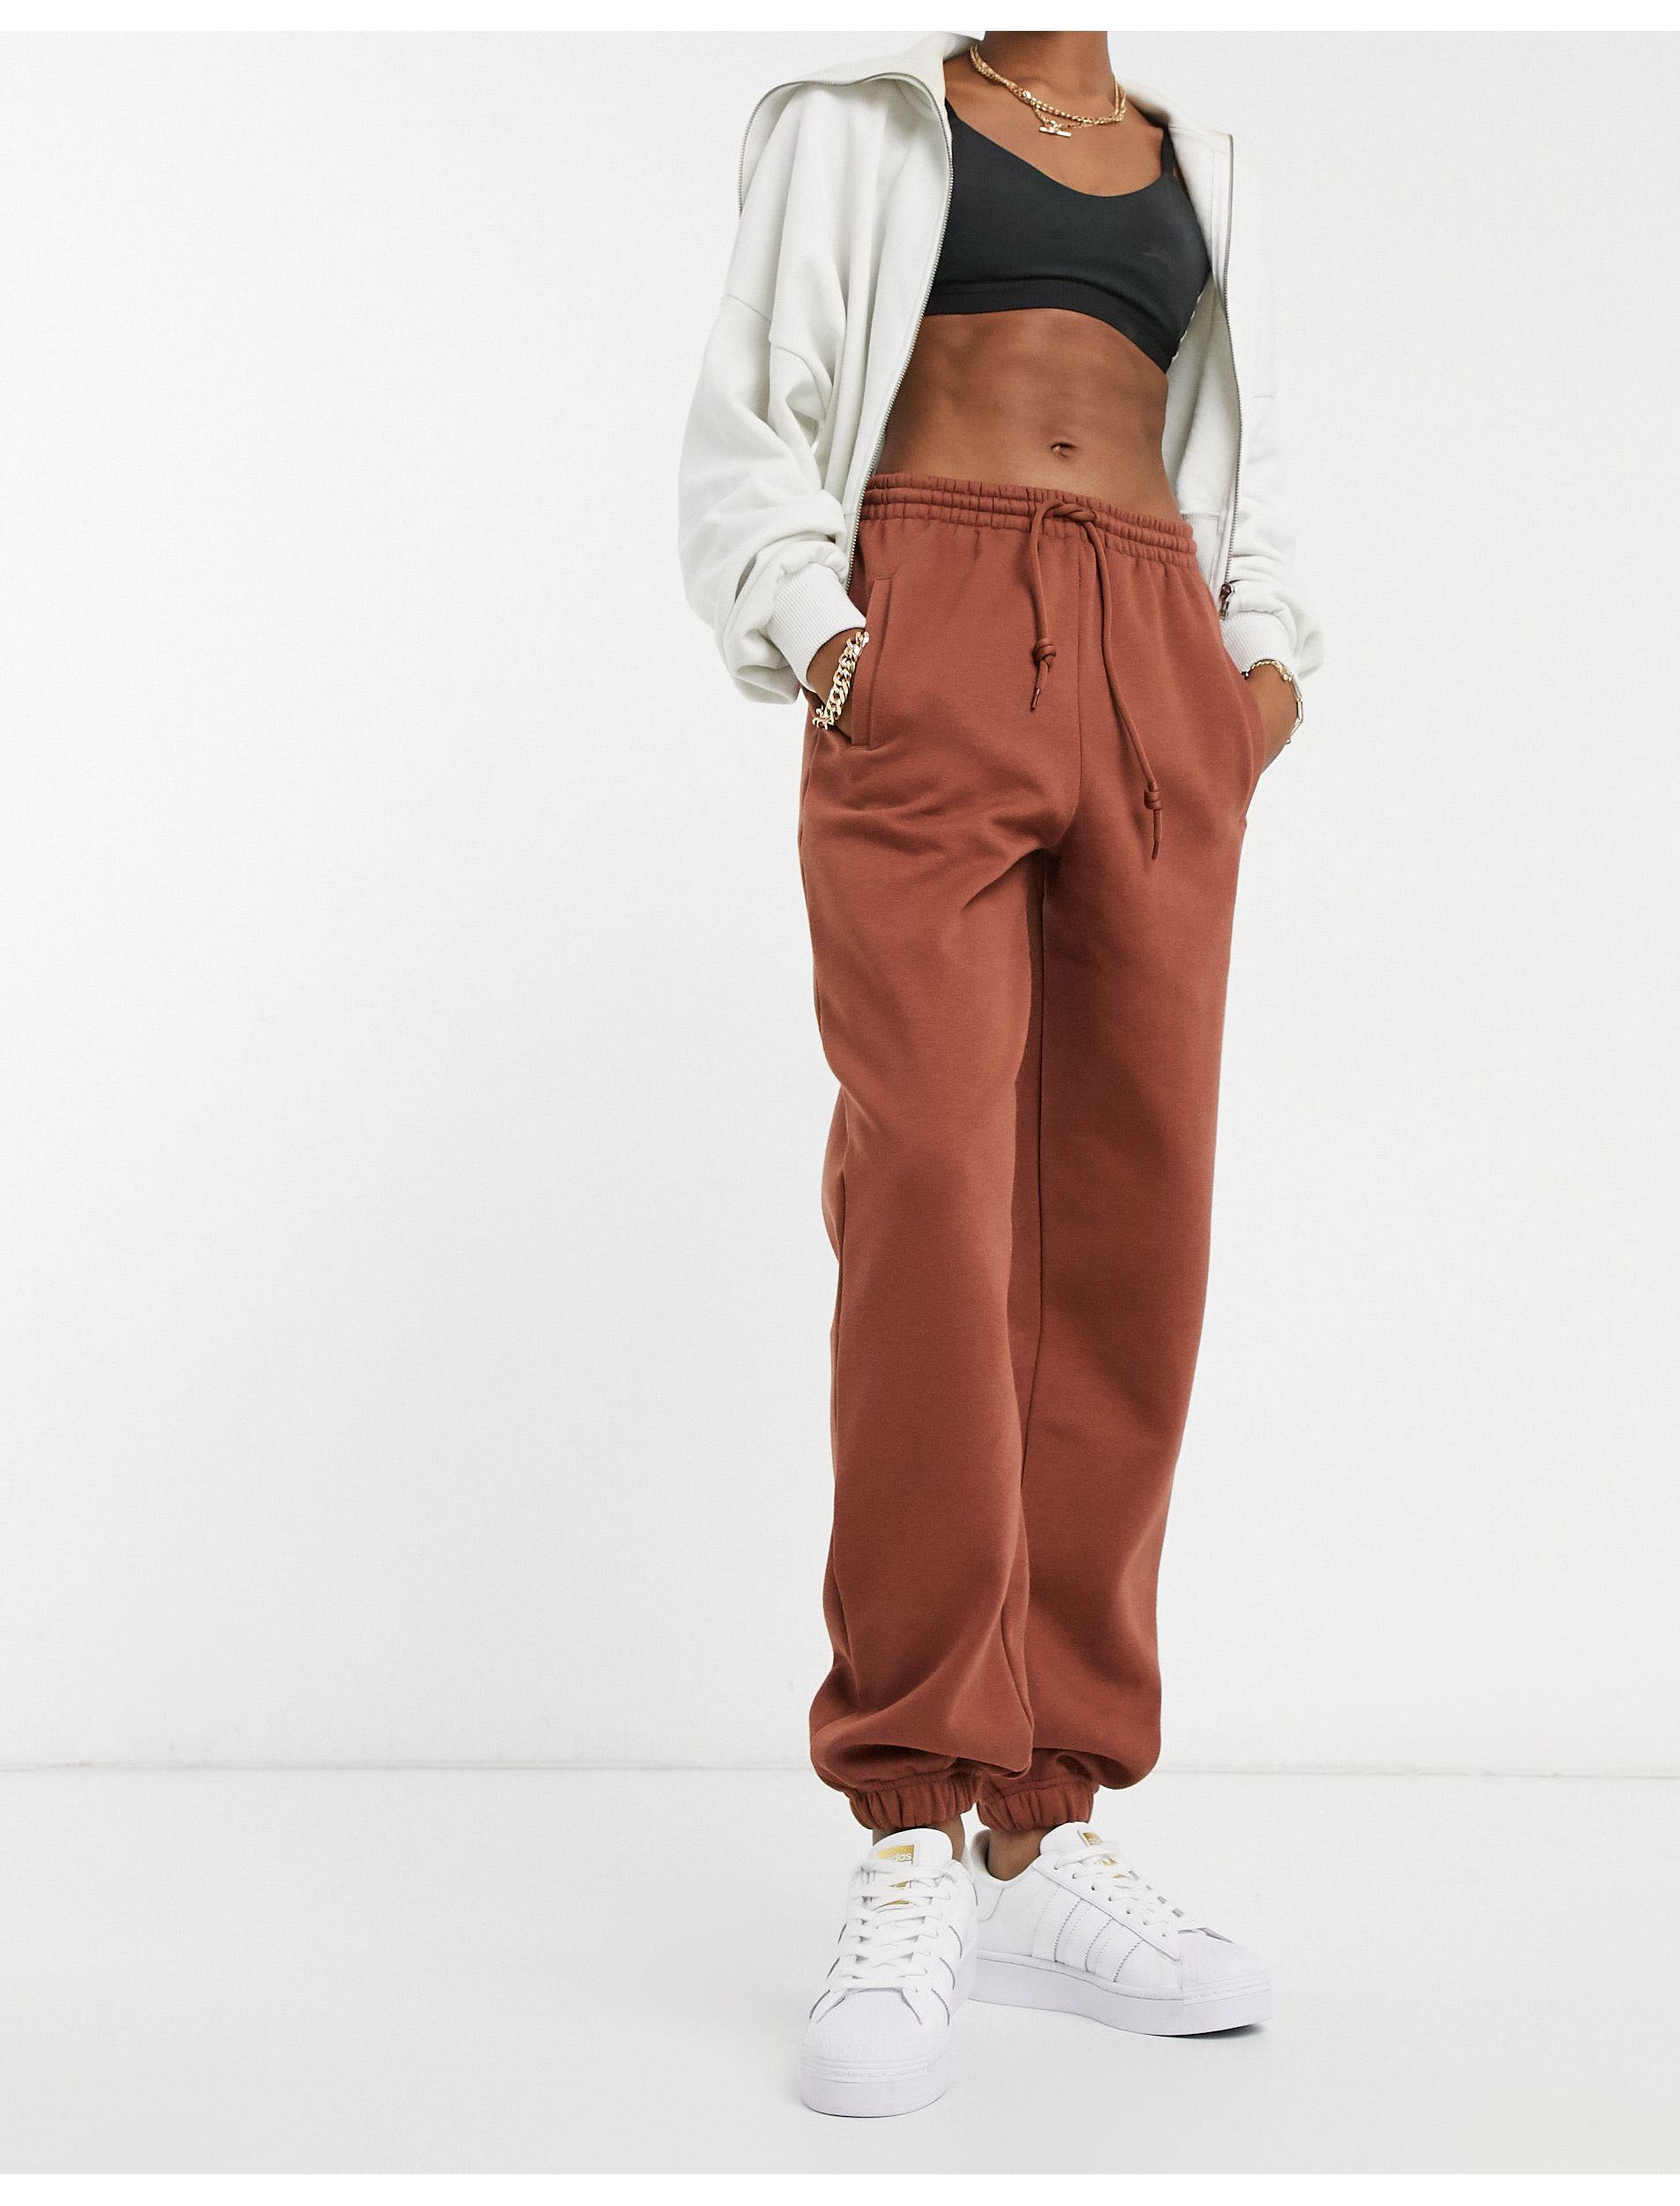 adidas Originals Cosy Comfort Oversized Cuffed Trackies in Brown - Lyst